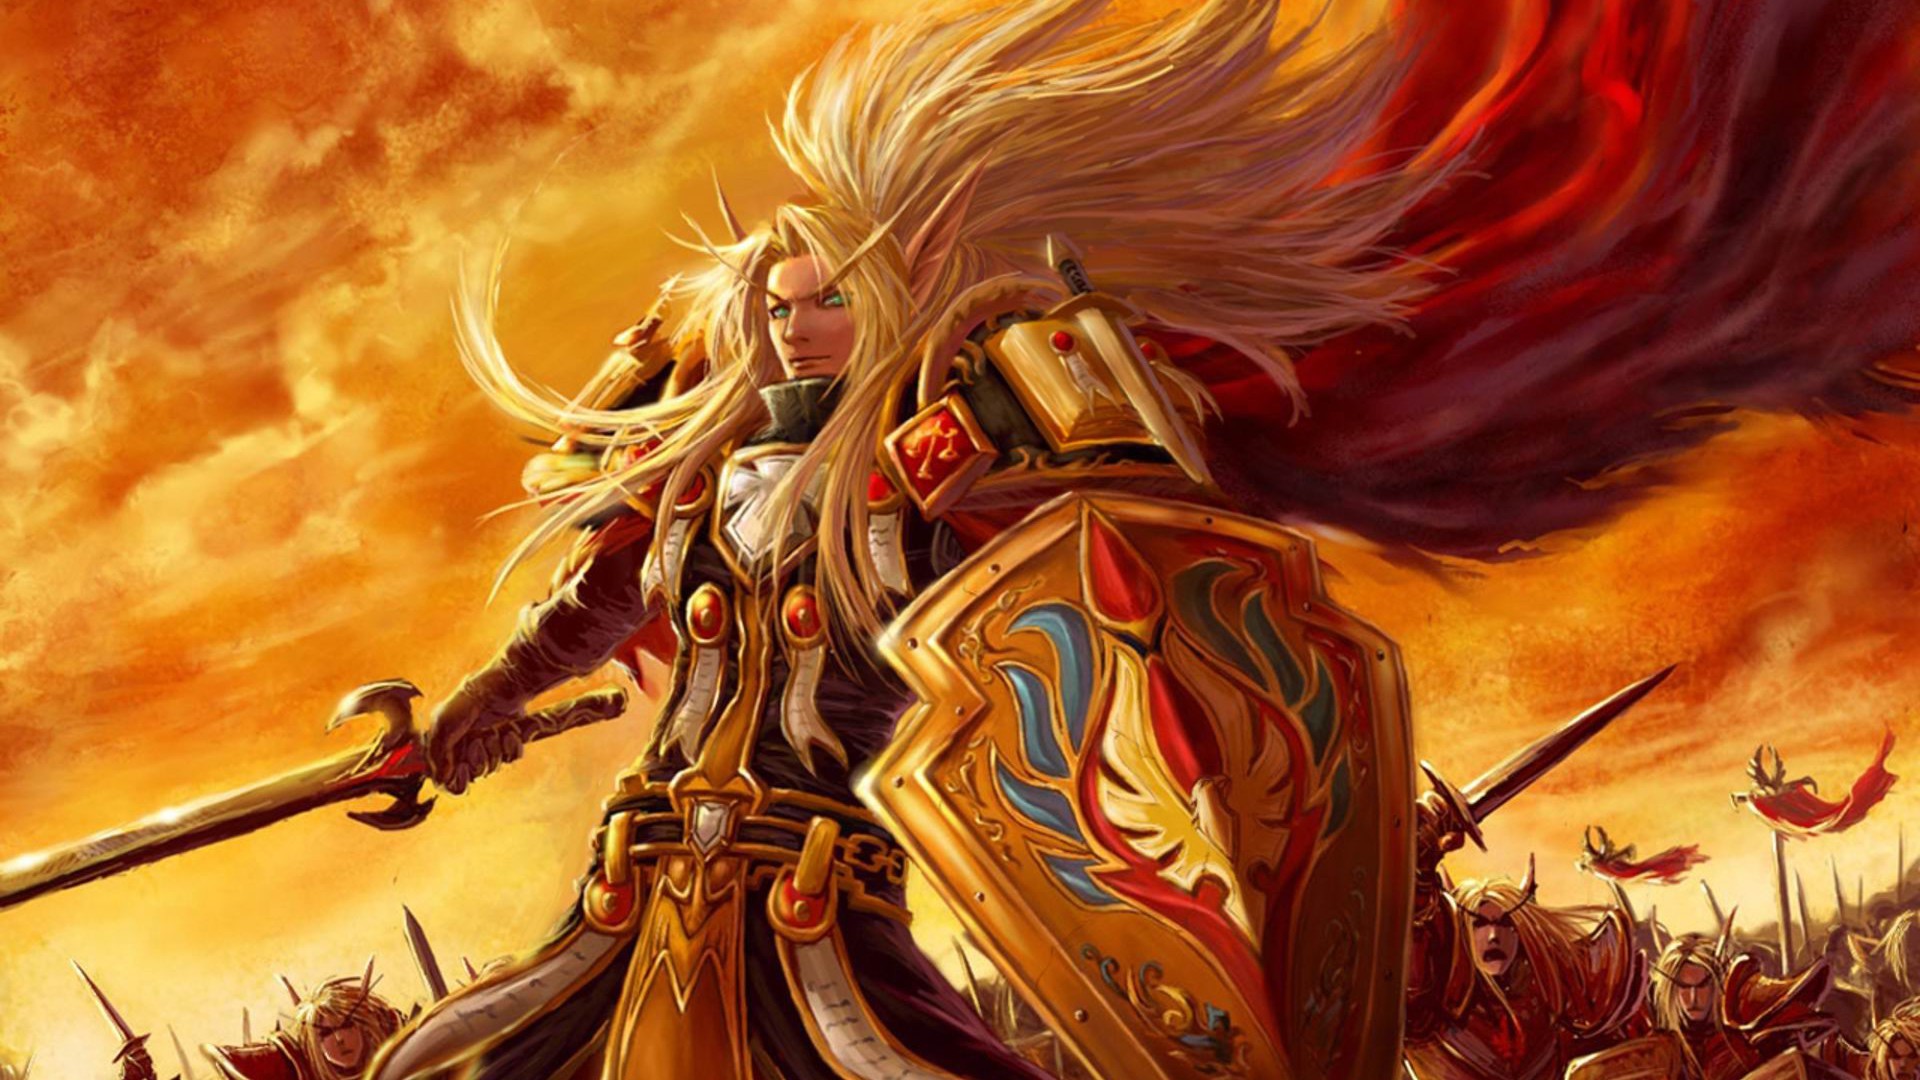 1920x1080 HD World Of Warcraft Knight Wallpaper for Computer Full Size .